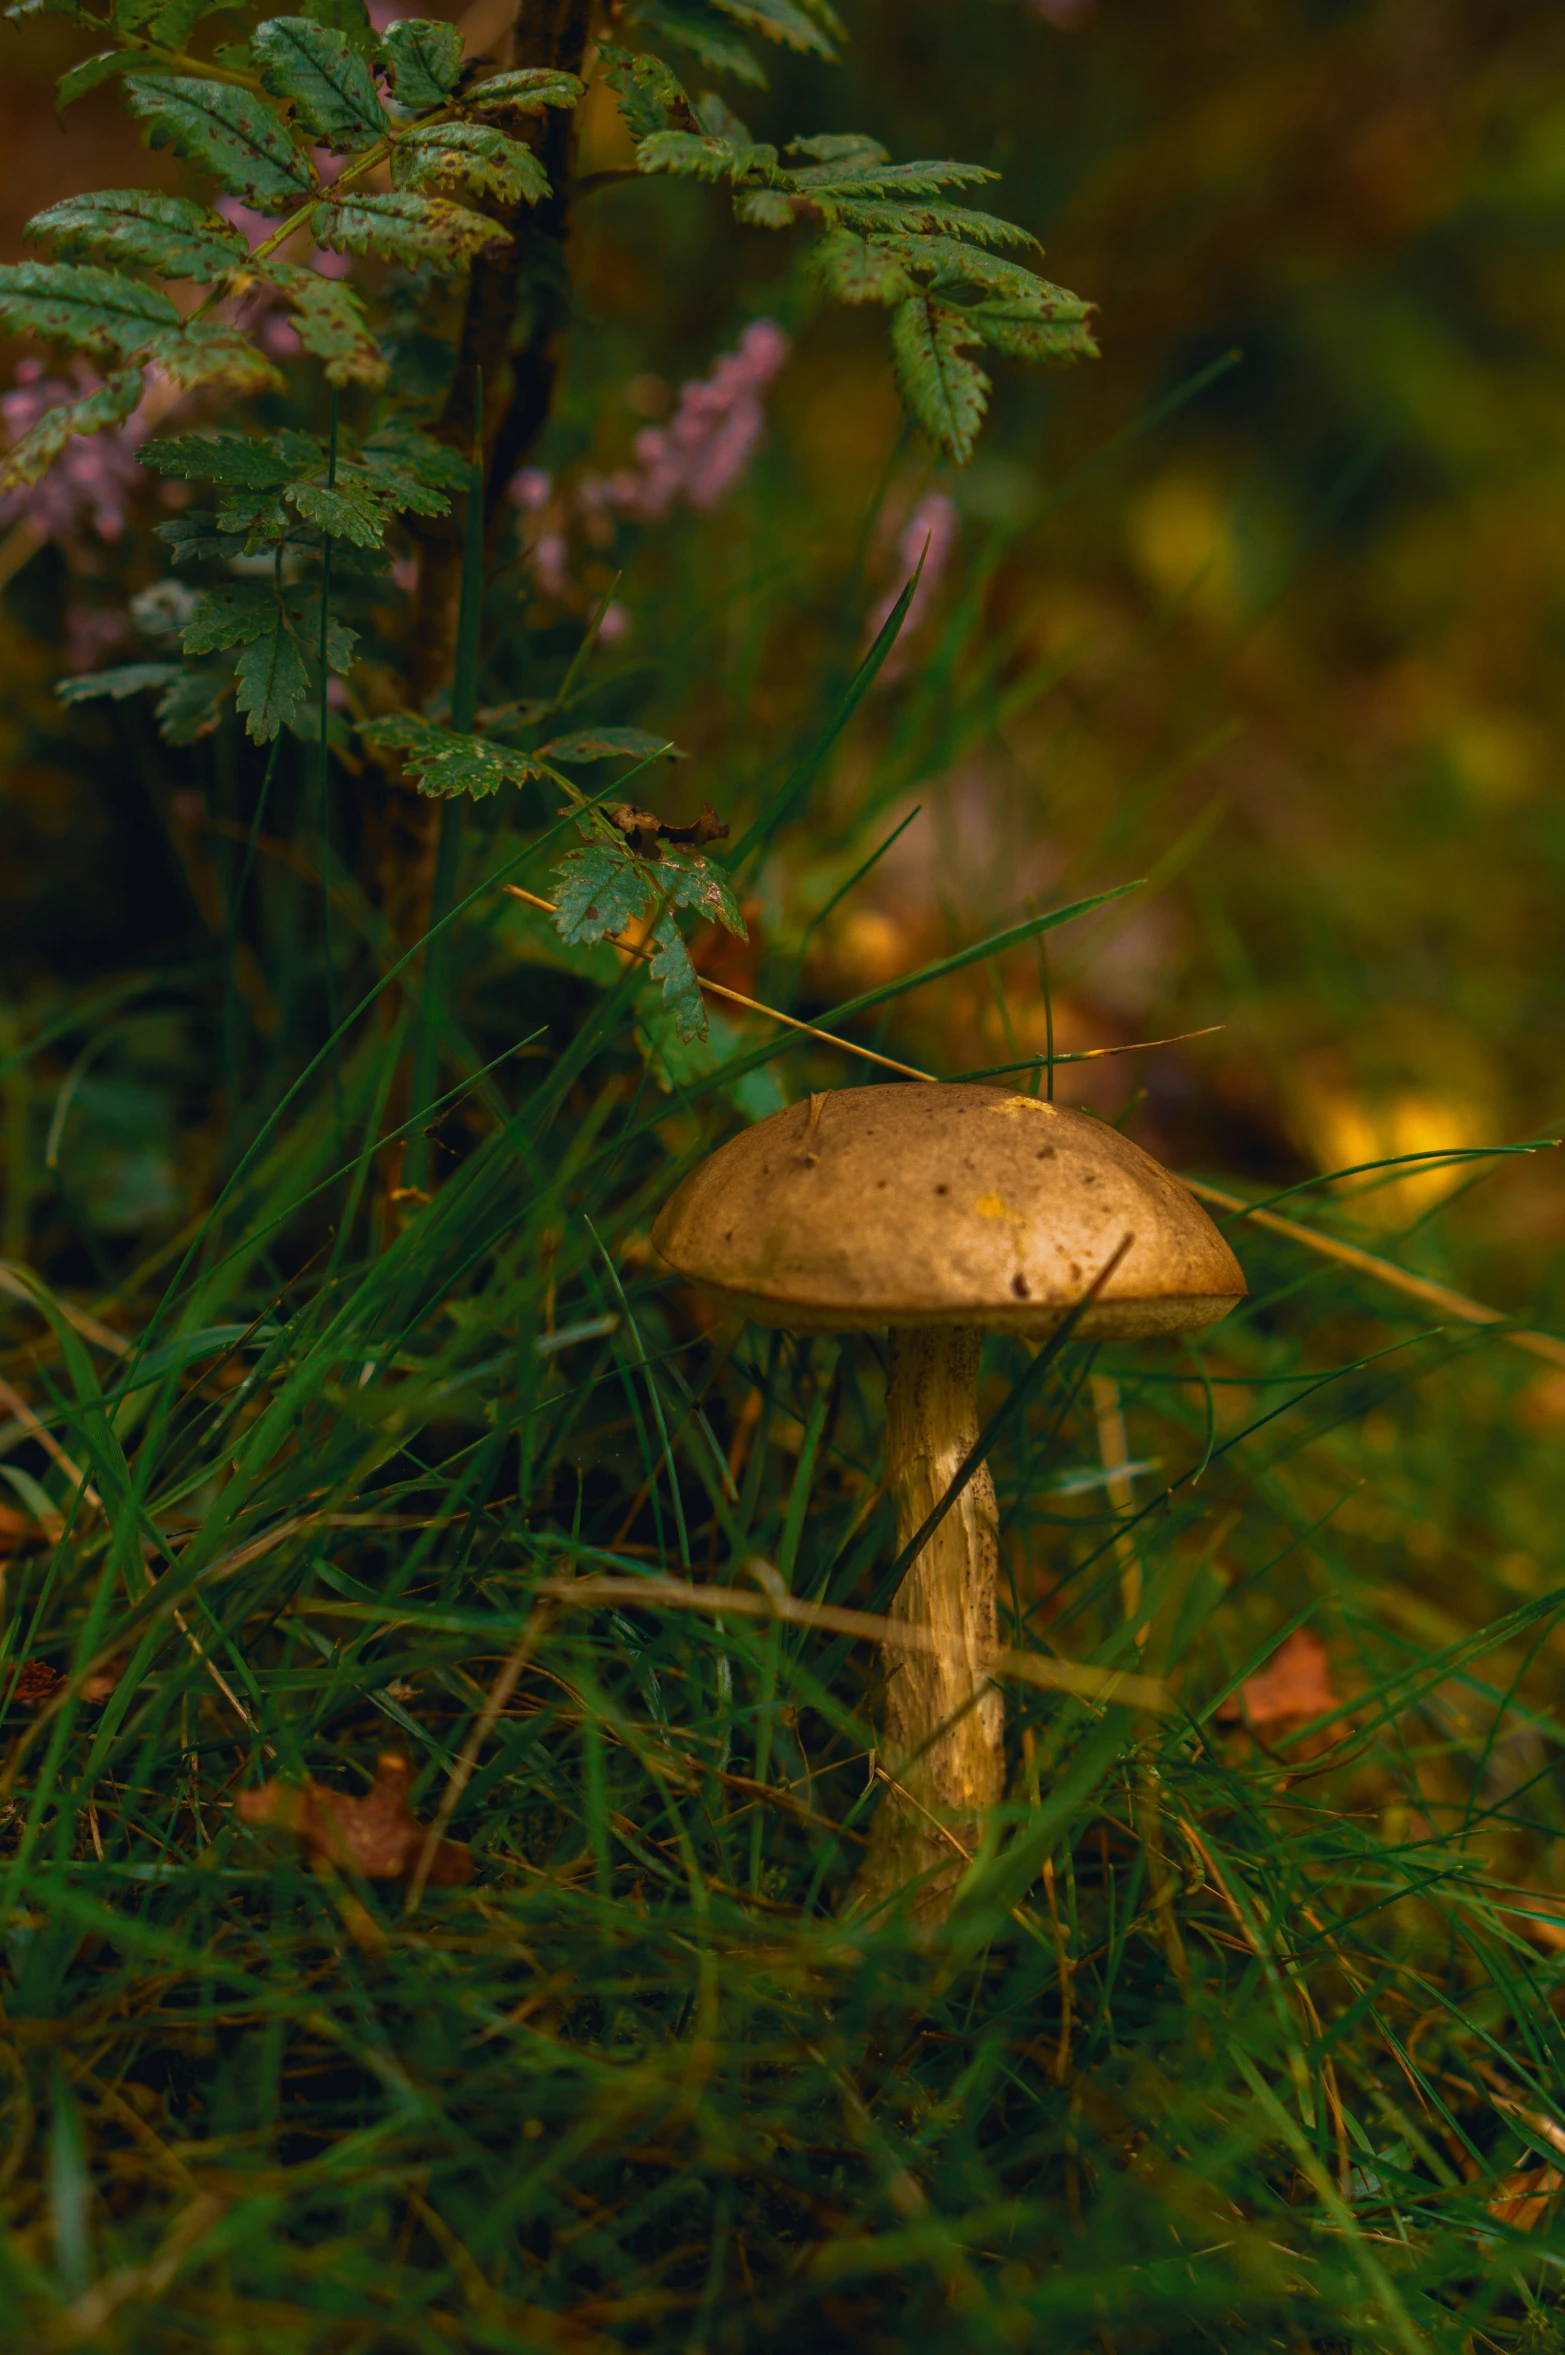 a mushroom in the grass surrounded by plants